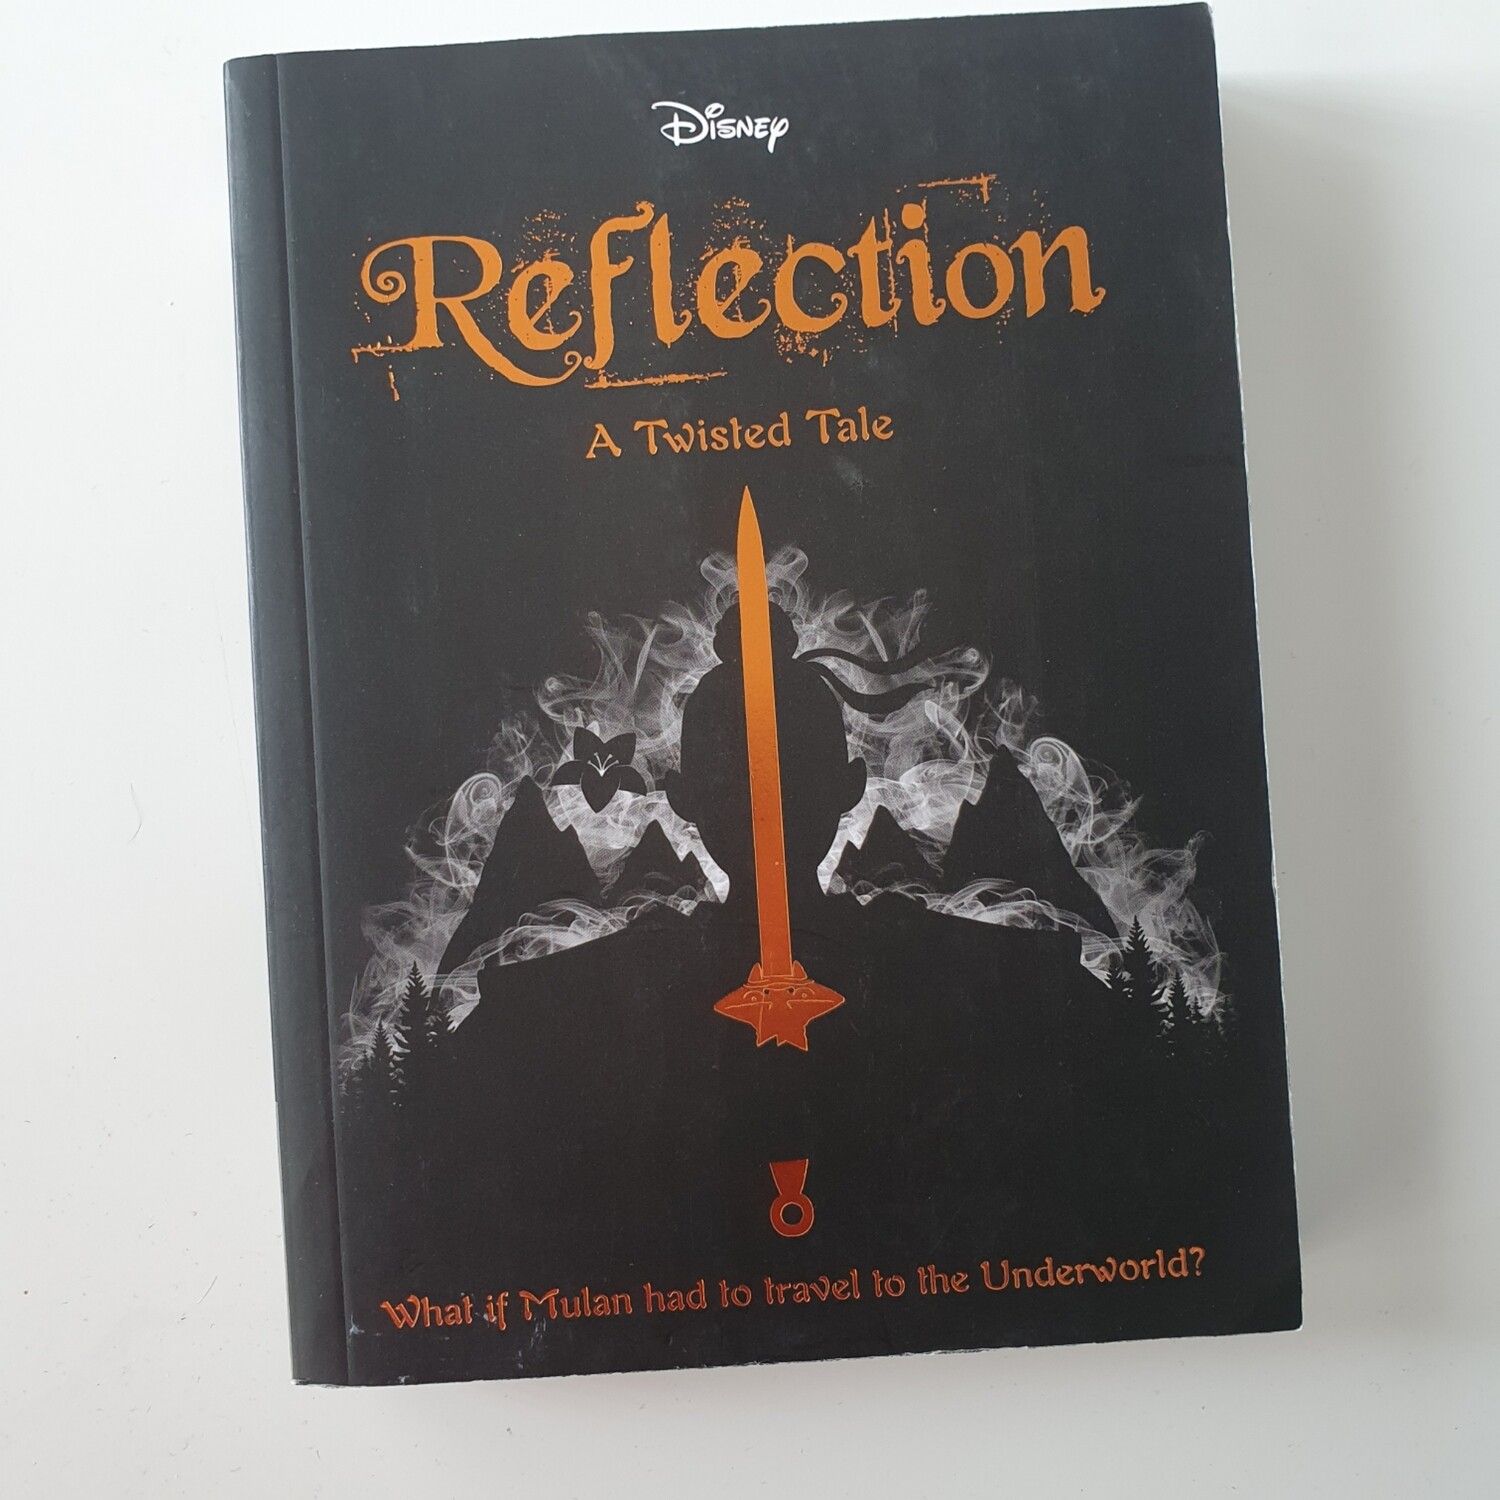 Mulan : Reflection - A Twisted Tale, Disney Notebook - made from a paperback book, comes with book corners